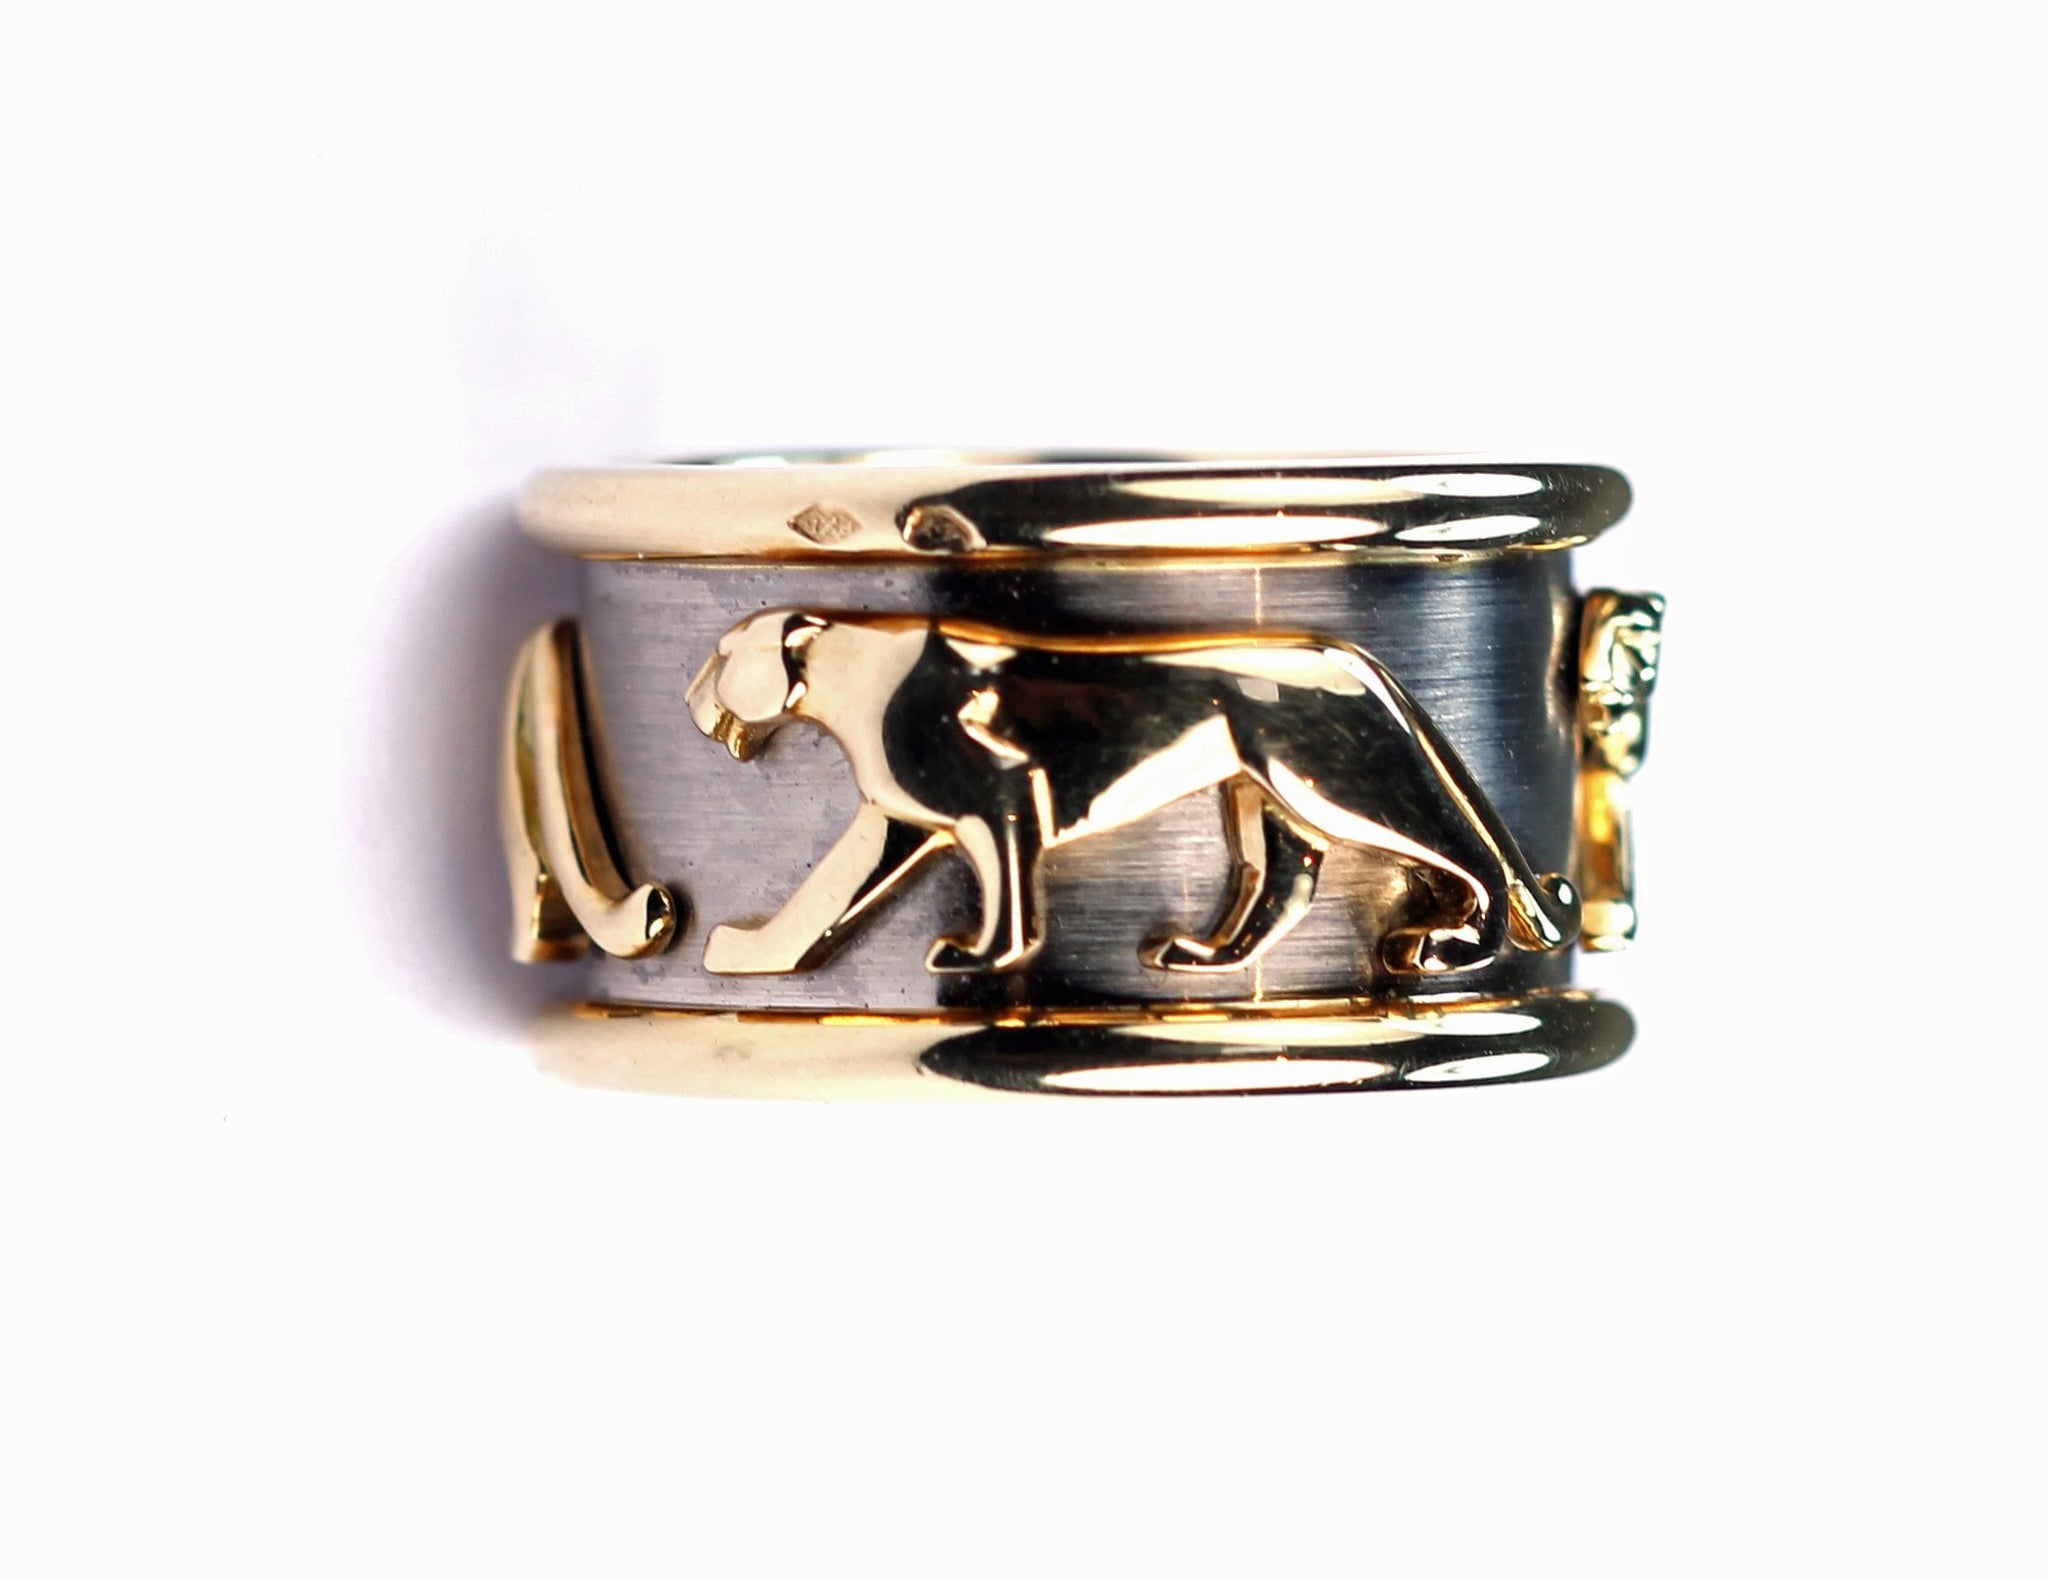 Vintage Cartier Panther Ring, SALE, SOLD